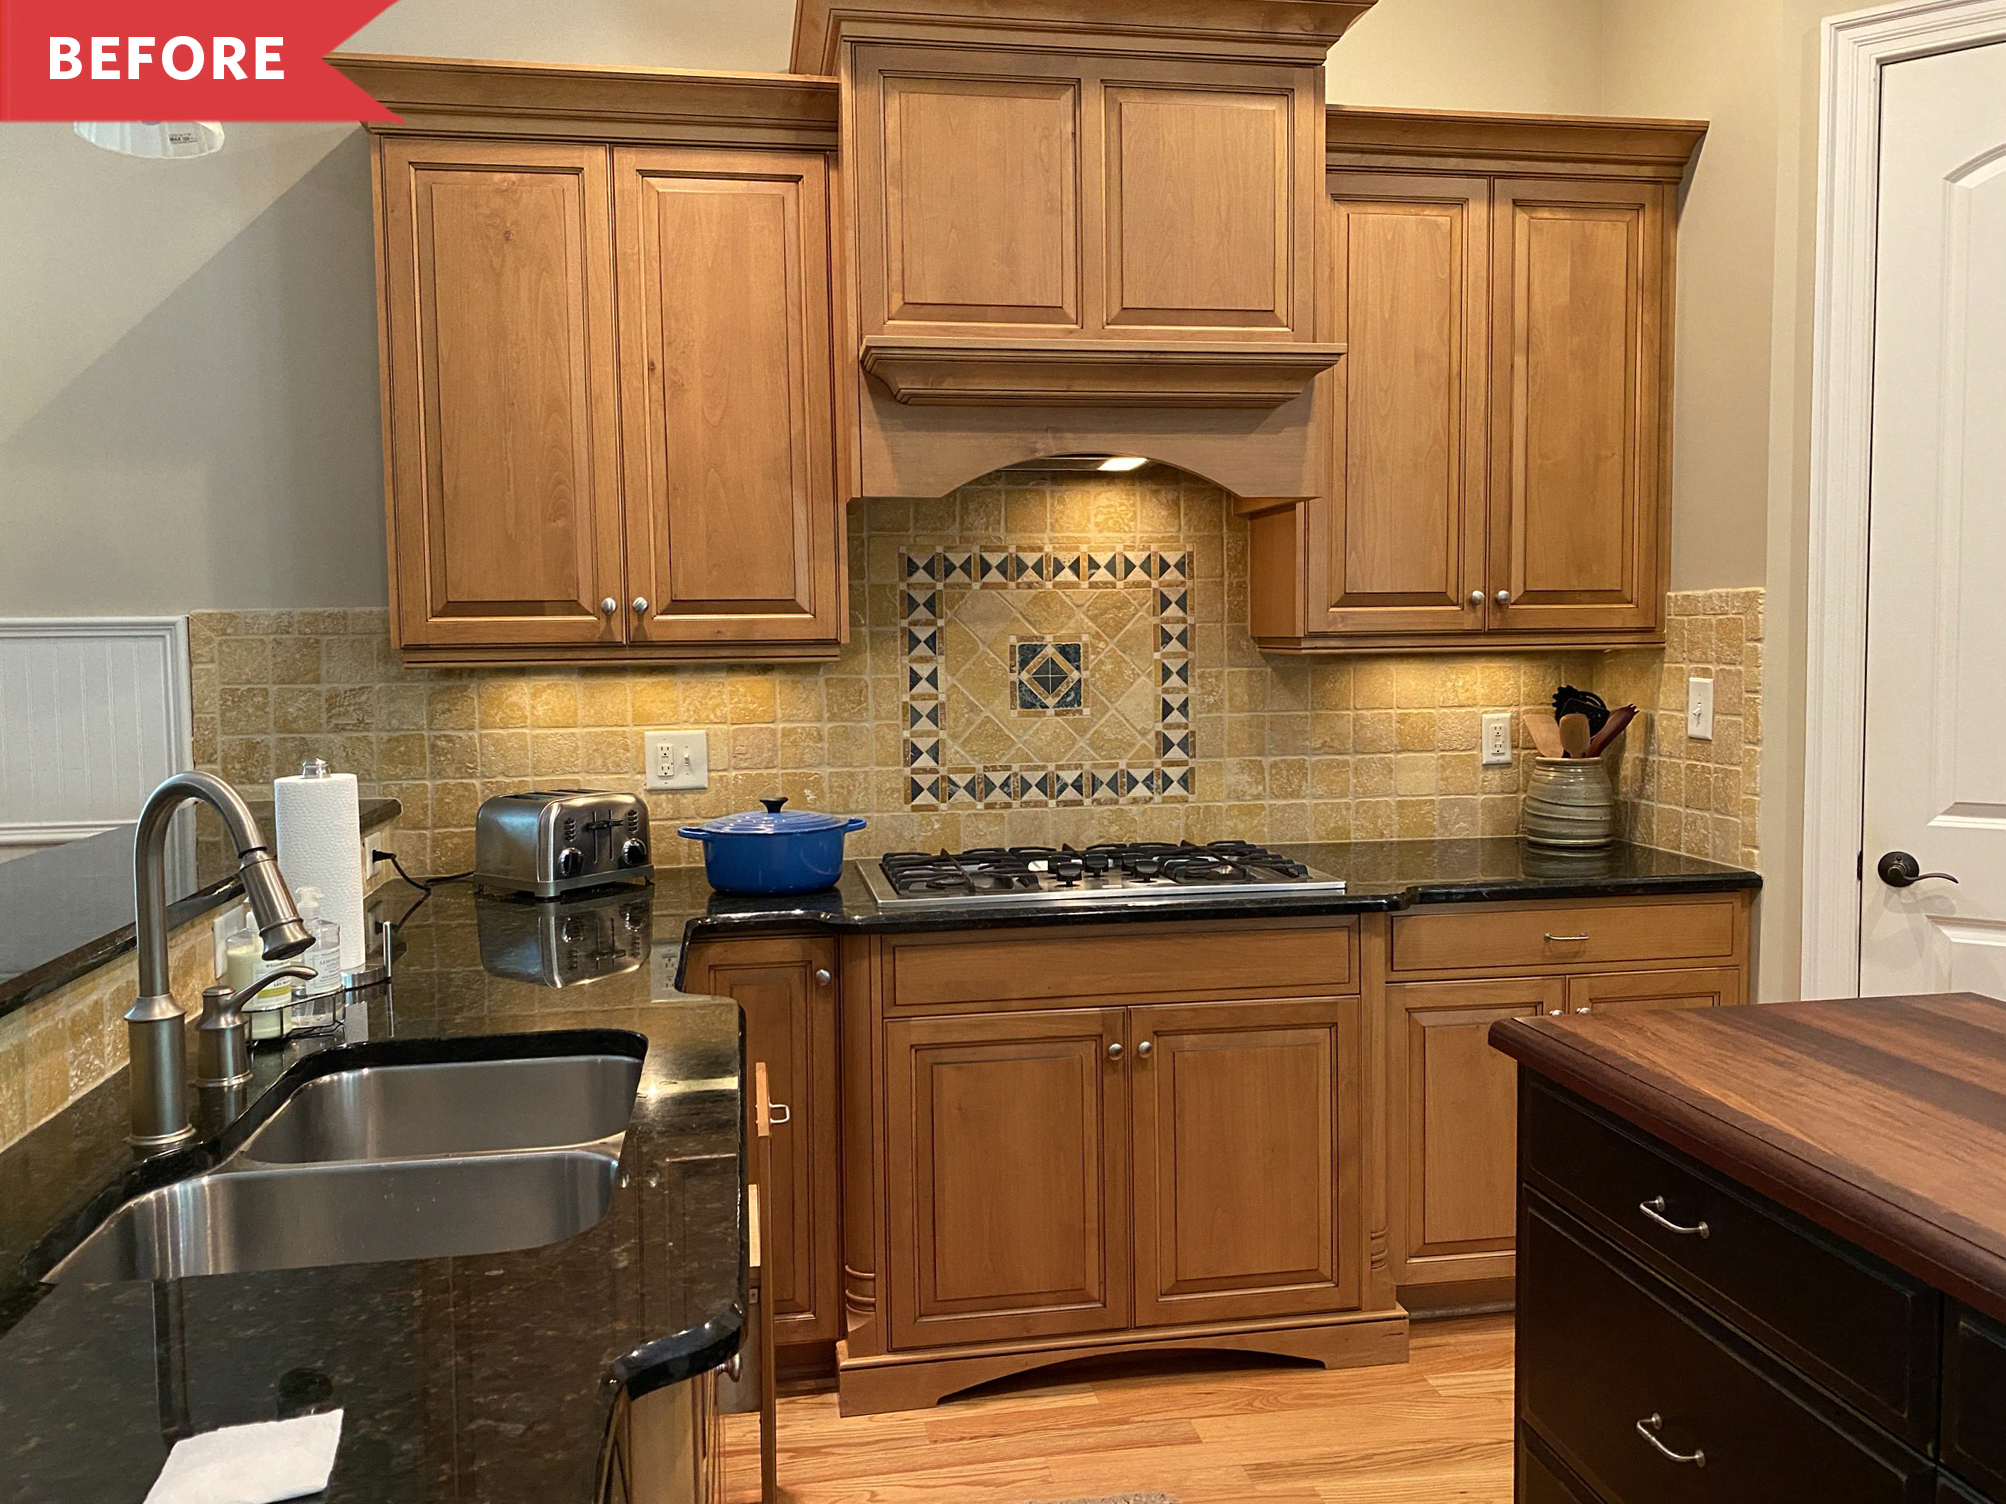 5 Tips to Survive Without a Kitchen During a Home Remodel in NY